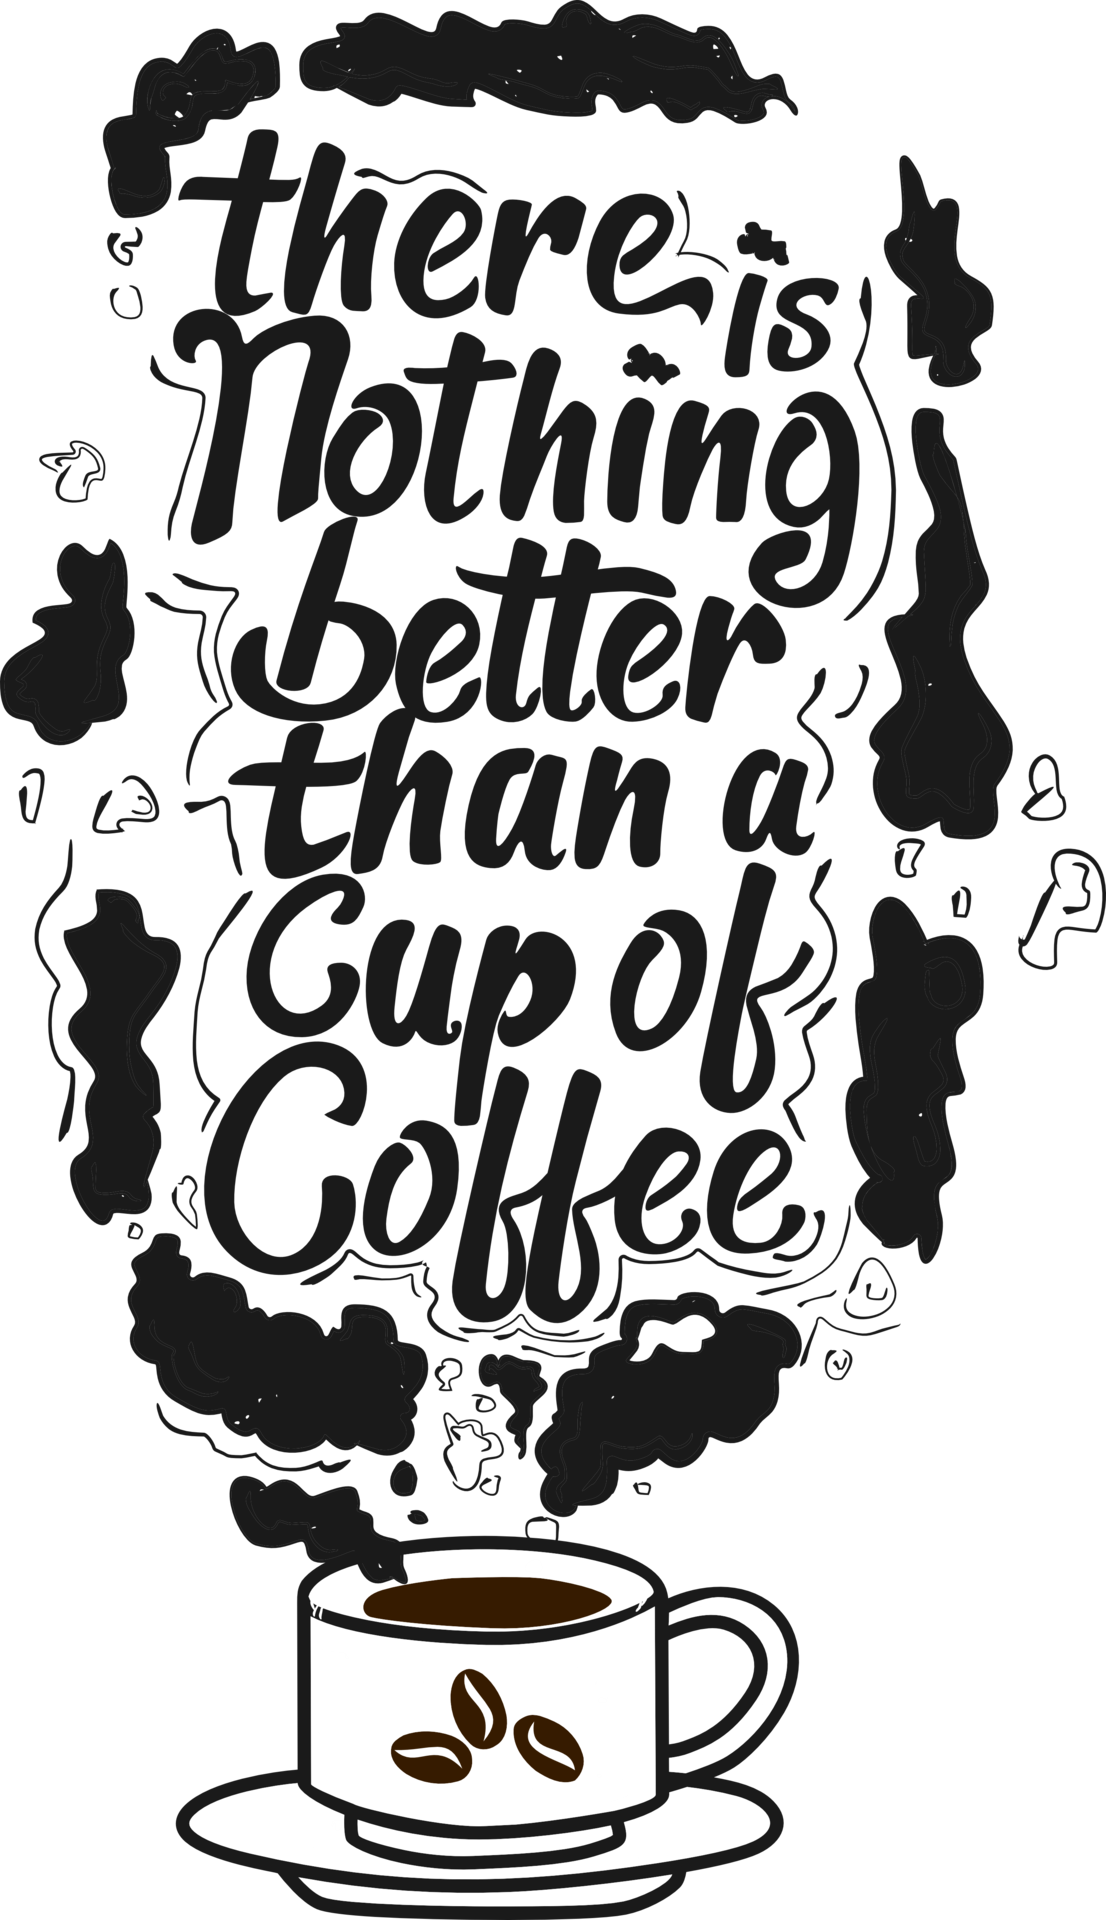 There Is Nothing Better Than a Cup of Coffee, Coffee Typography Quote ...